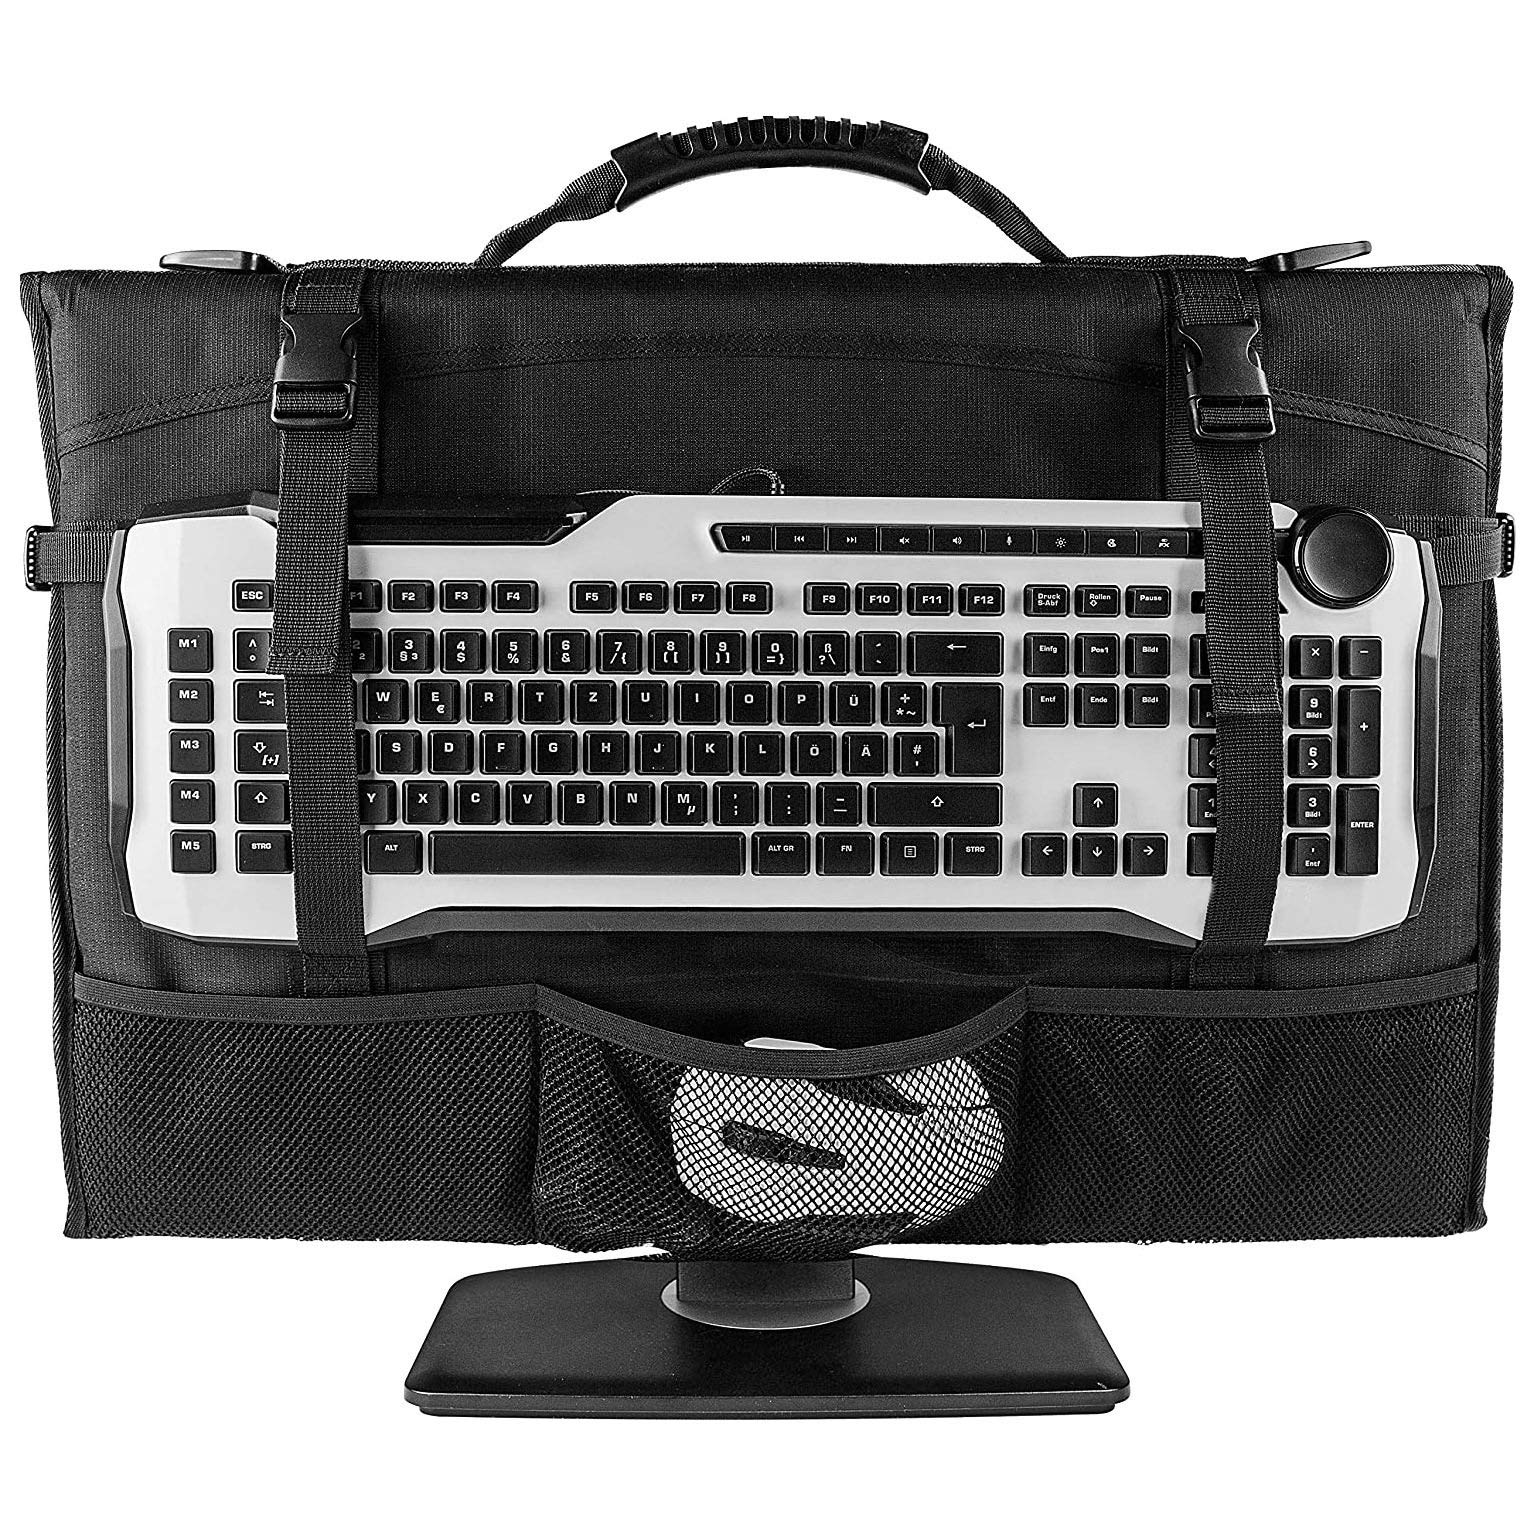 Amazon.com: BUBM Desktop PC Computer Travel Storage Carrying Case Bag for  Computer Main Processor Case, Monitor, Keyboard and Accessories :  Electronics